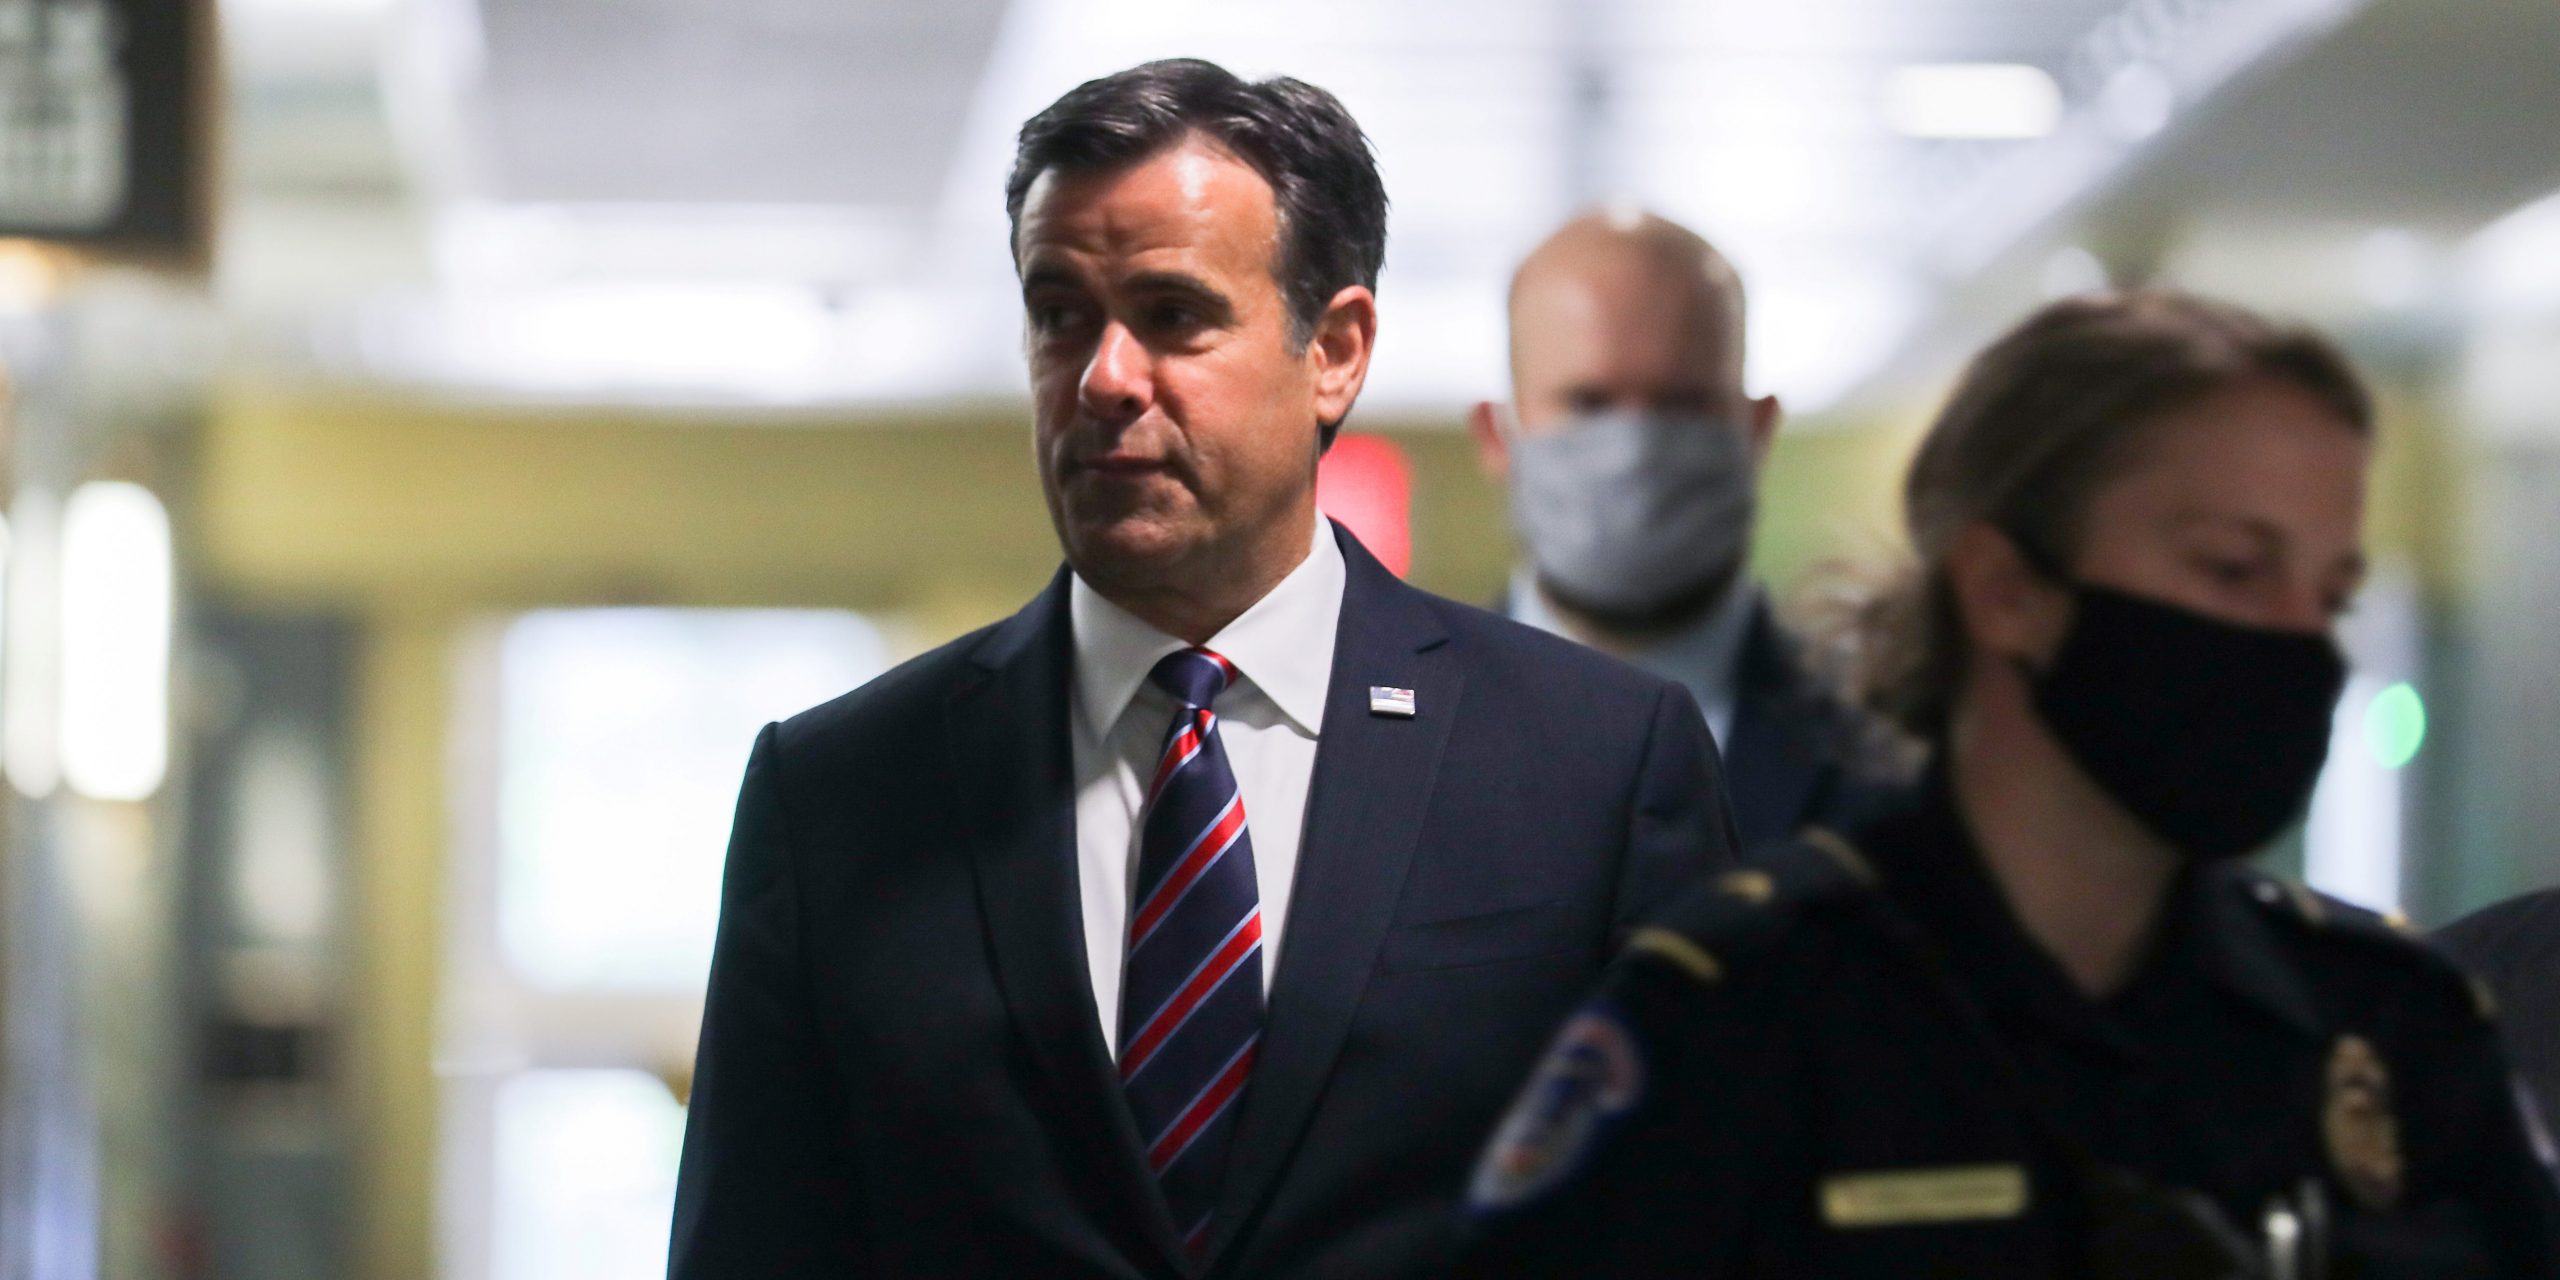 FILE PHOTO: U.S. Rep. John Ratcliffe (R-TX), President Donald Trump's nominee to be Director of National Intelligence, is escorted by U.S. Capitol police officers and other security officials wearing face masks because of the COVID-19 disease outbreak as he arrives to testify at his U.S. Senate confirmation hearing in front of the Senate Intelligence Committee in Washington, U.S. May 5, 2020.  REUTERS/Carlos Barria